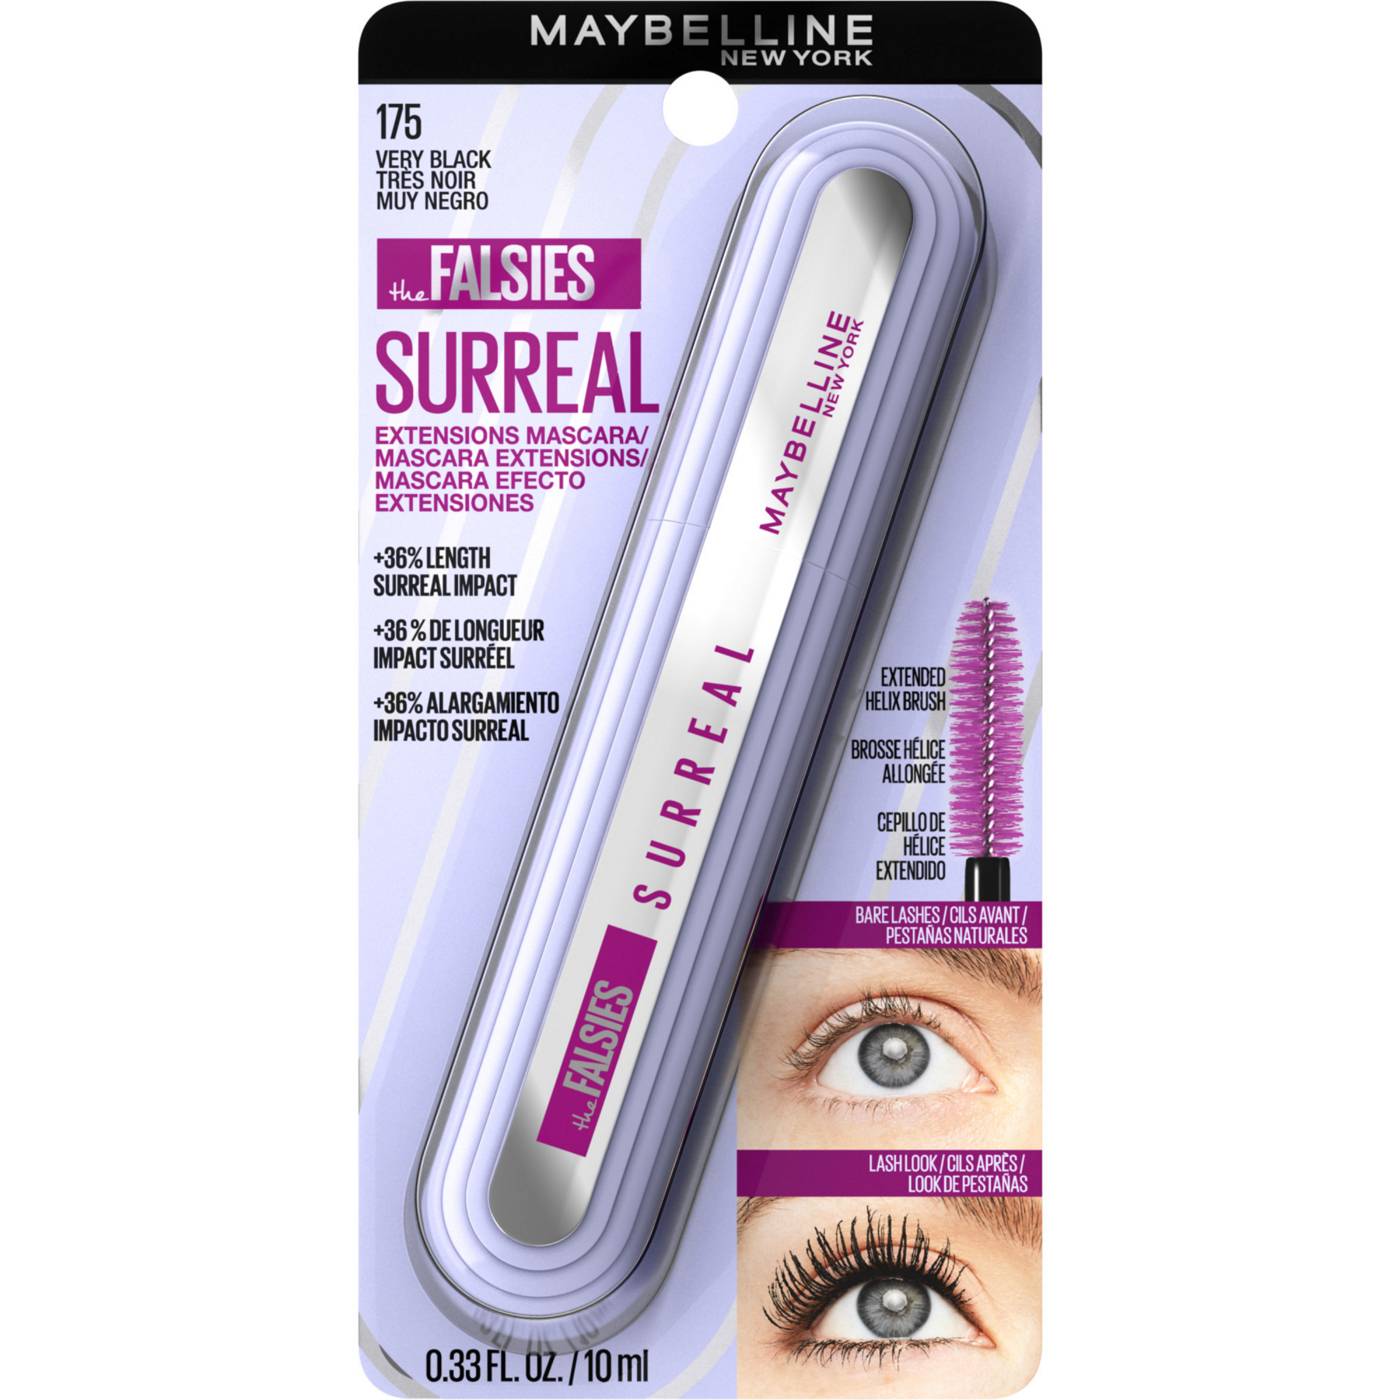 Maybelline The Falsies Surreal Mascara  - Very Black; image 1 of 3